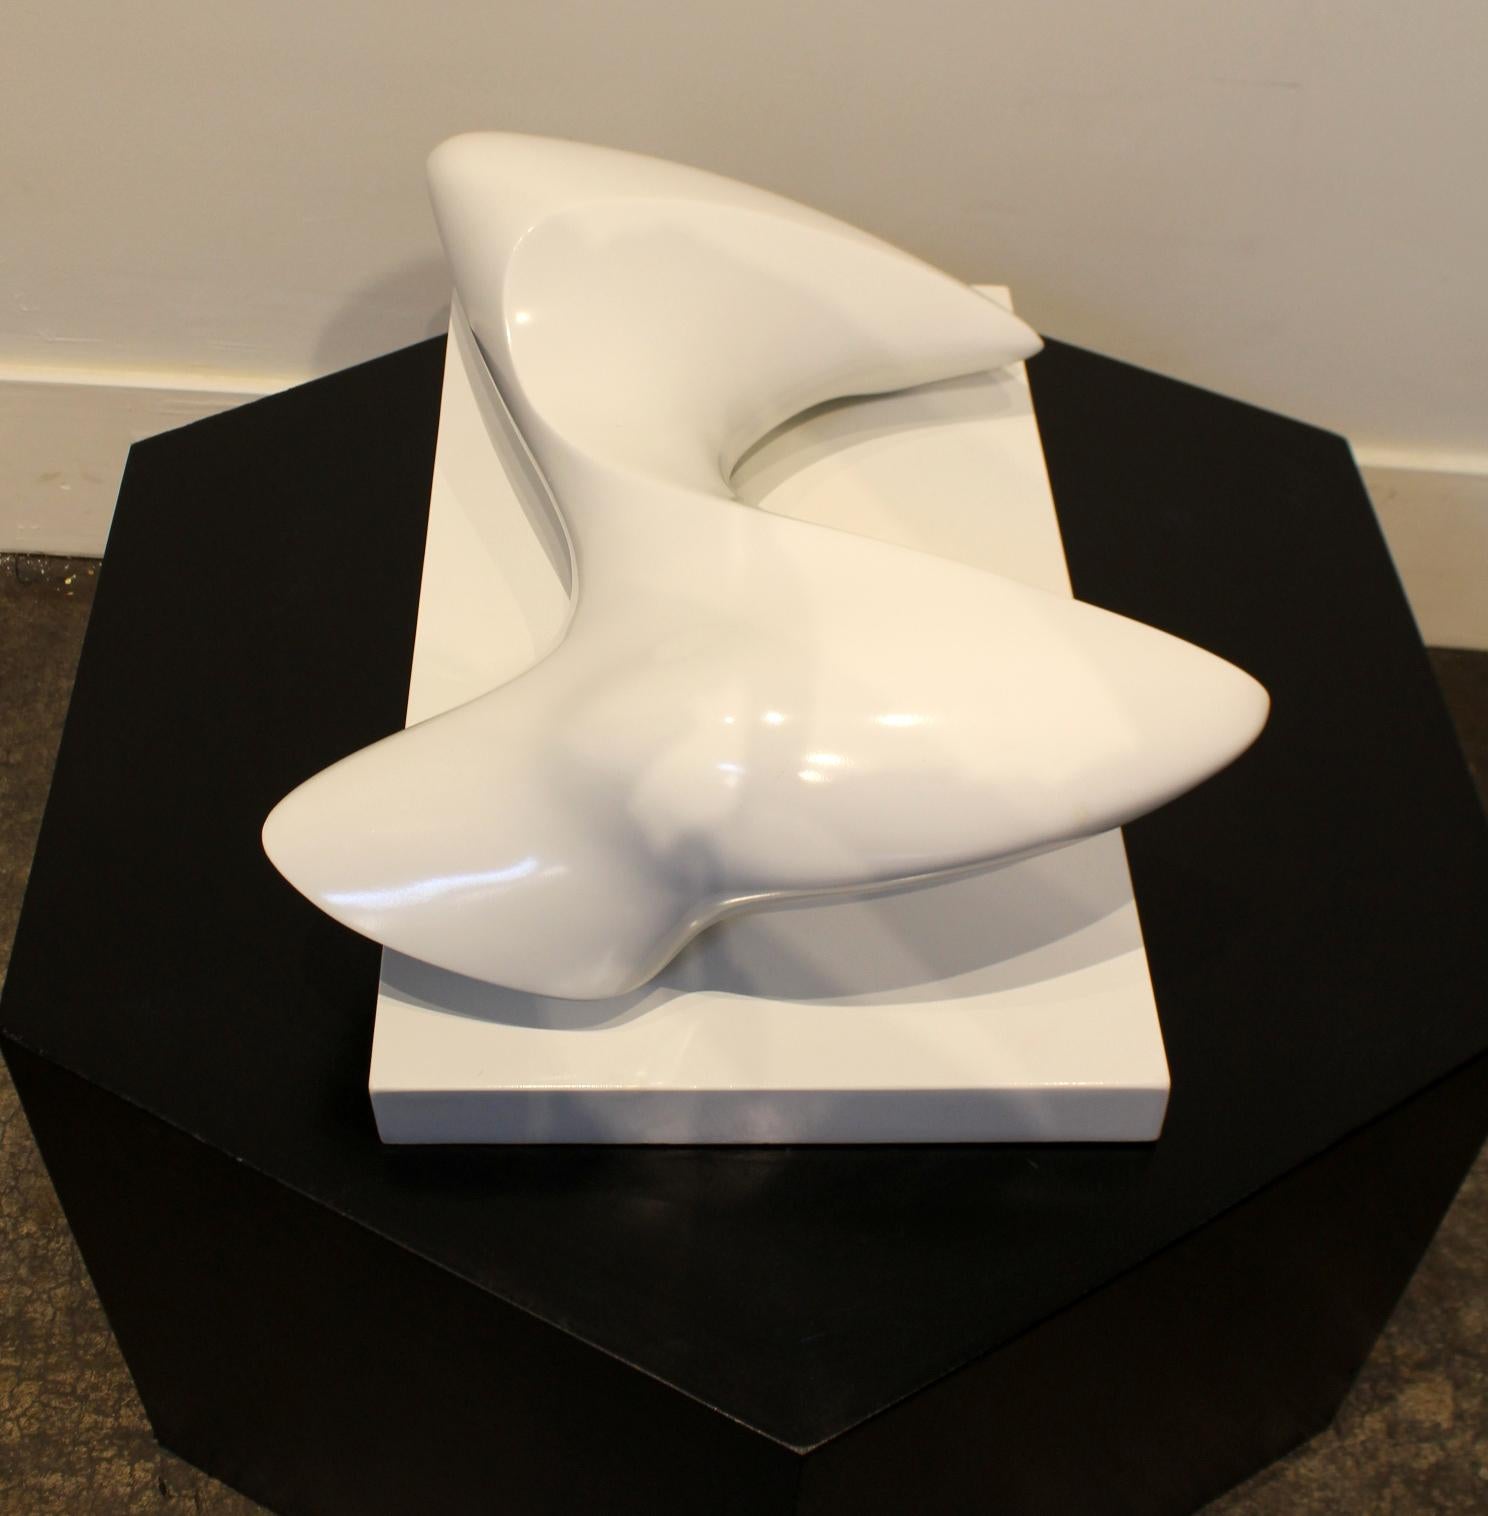 American Mid-Century Modern Free-Form Sculpture by David Anderson